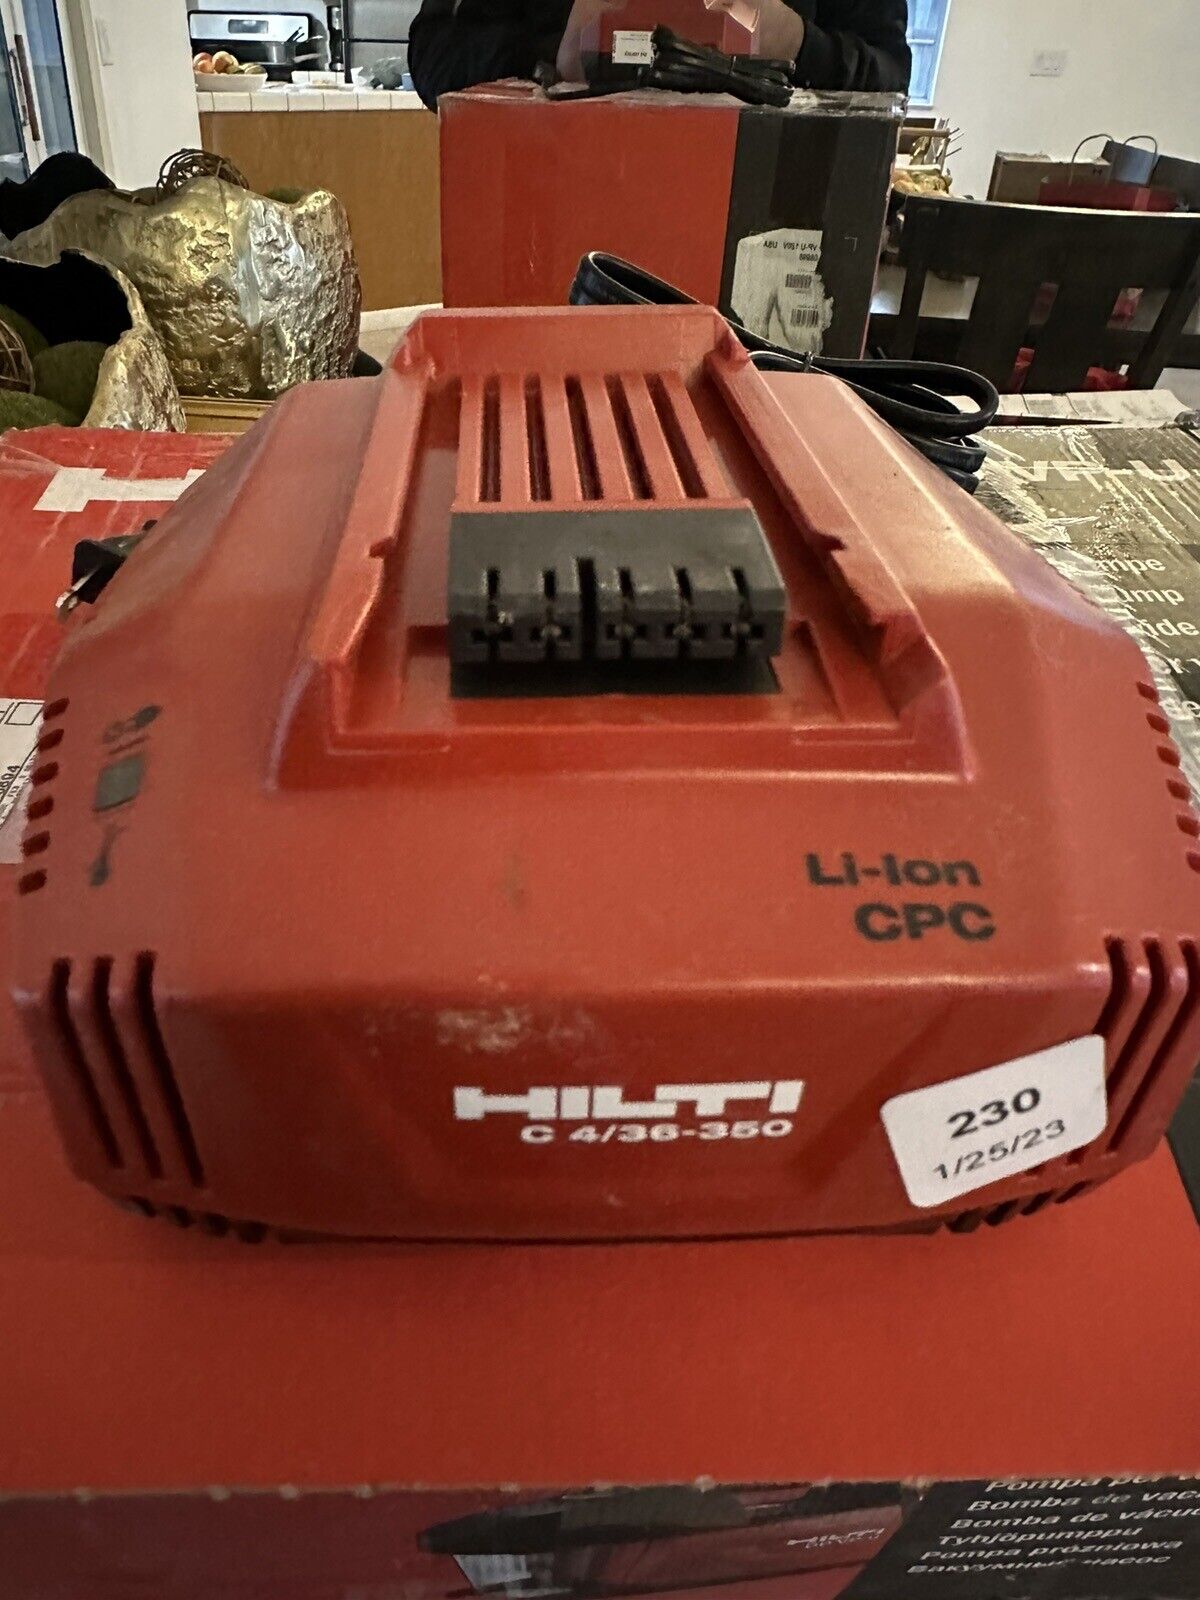 HILTI LI-ION MULTI-VOLT FAST CHARGER MODEL: C 4/36-350 (PARTS/AS-IS) Ships Free